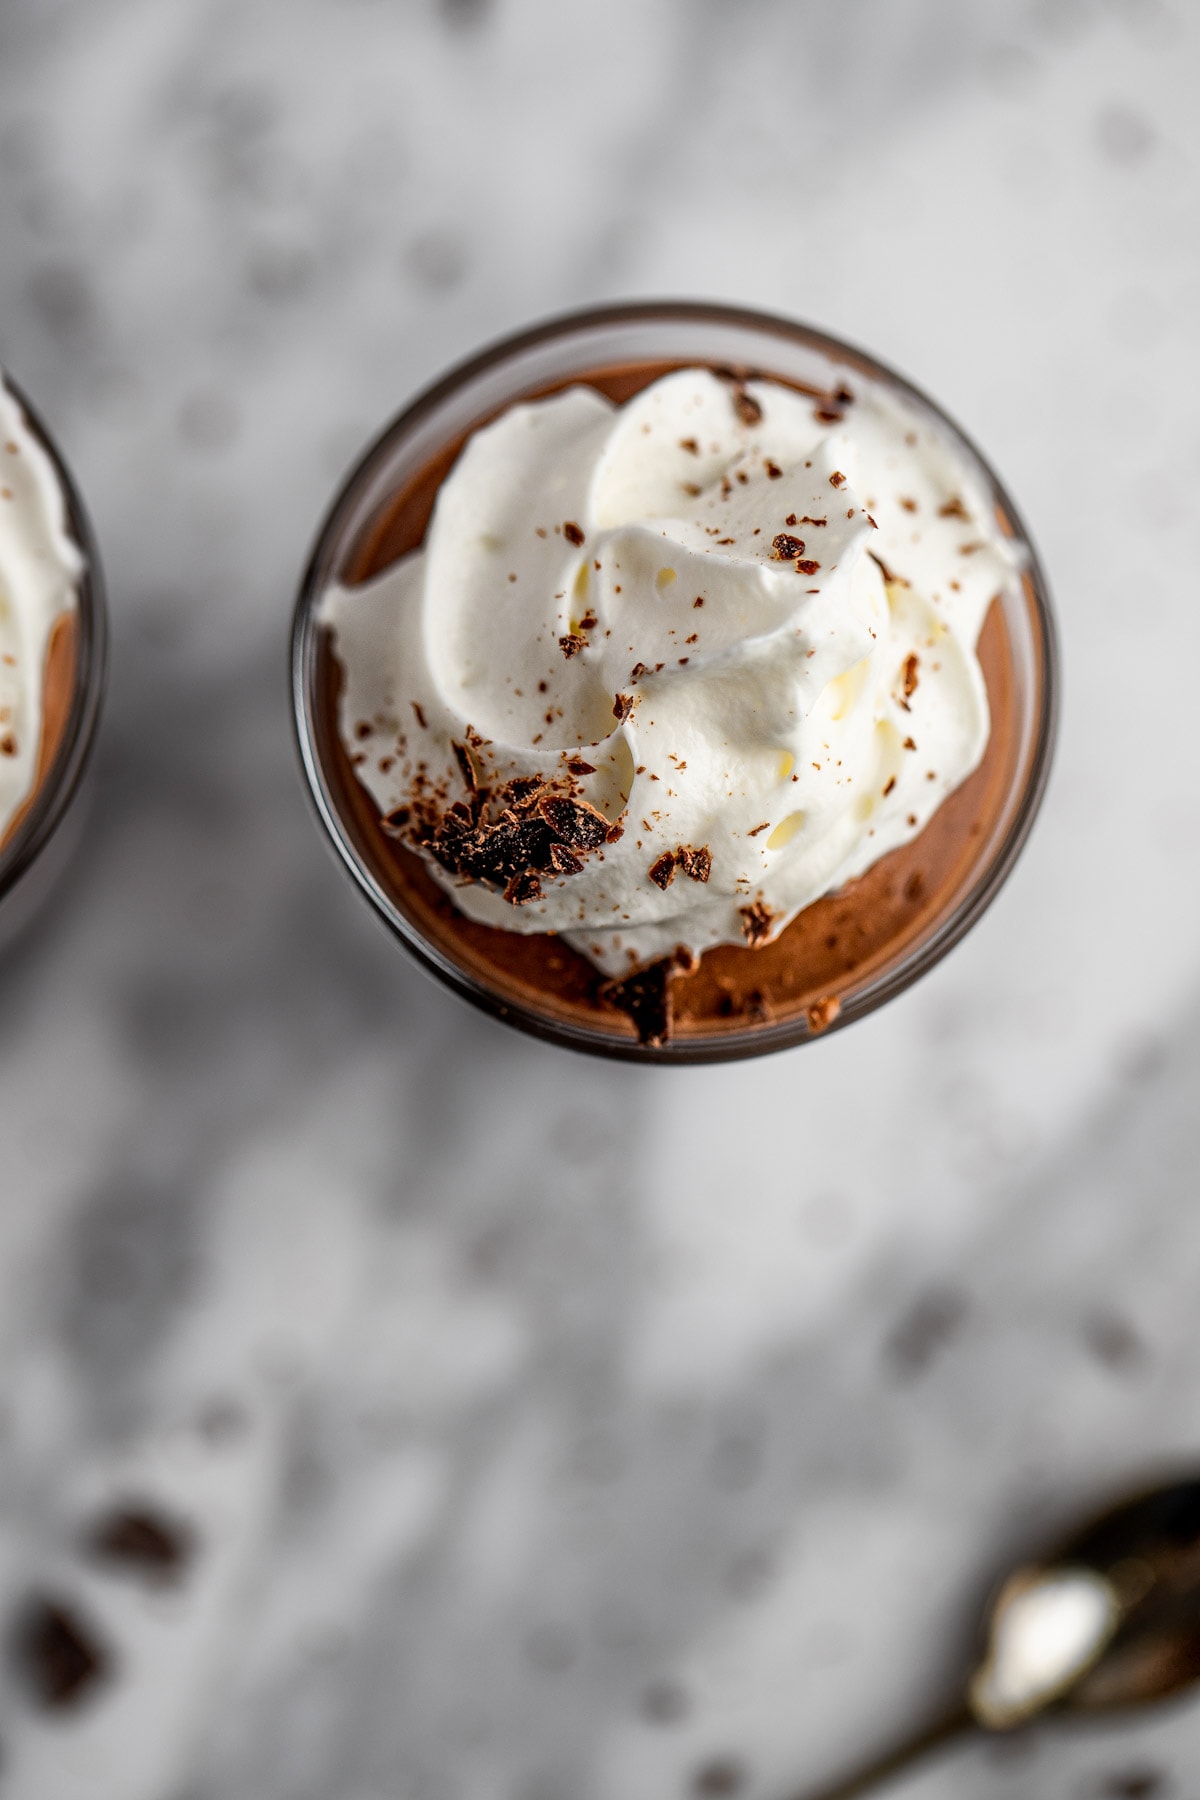 An overhead, up-close view of a rumchata shot topped with whipped cream.